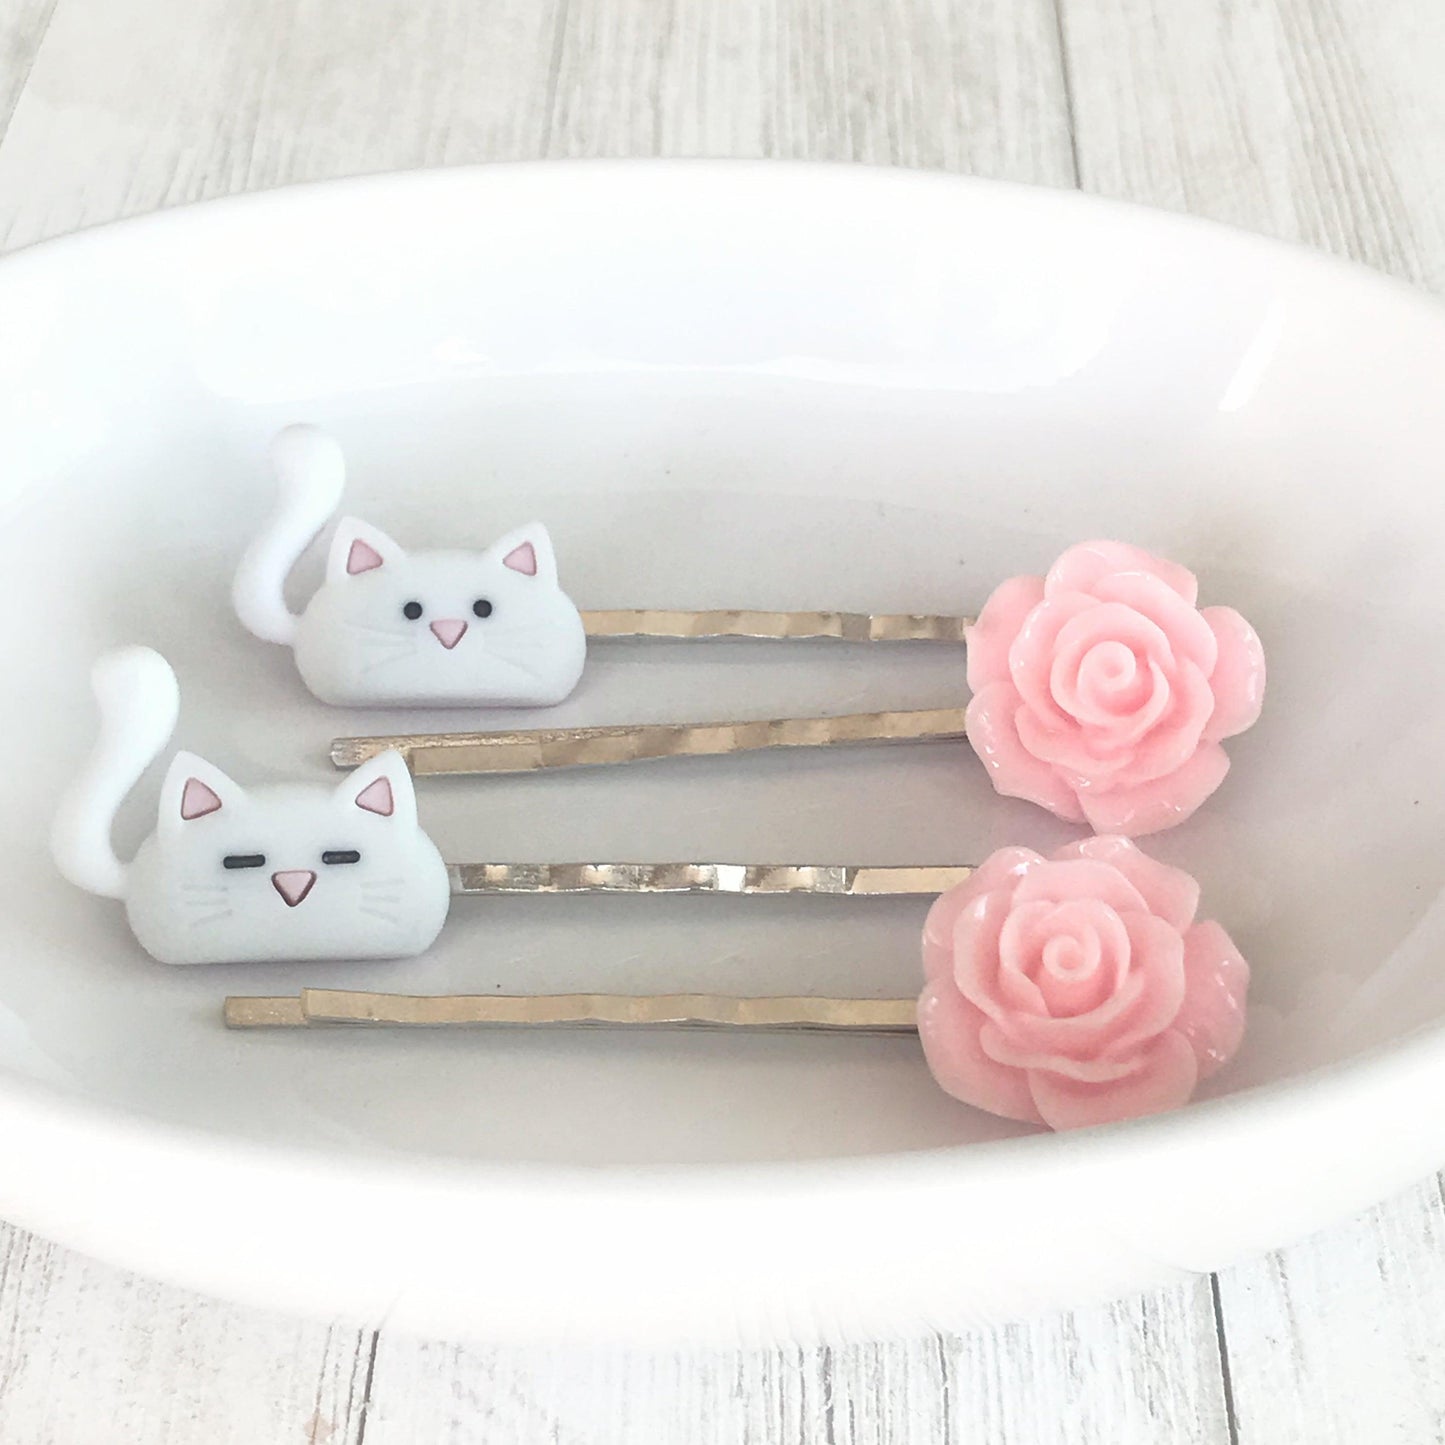 White Cats & Pink Flower Hair Pin Set- Charming Accessories for Cat Lovers & Floral Enthusiasts